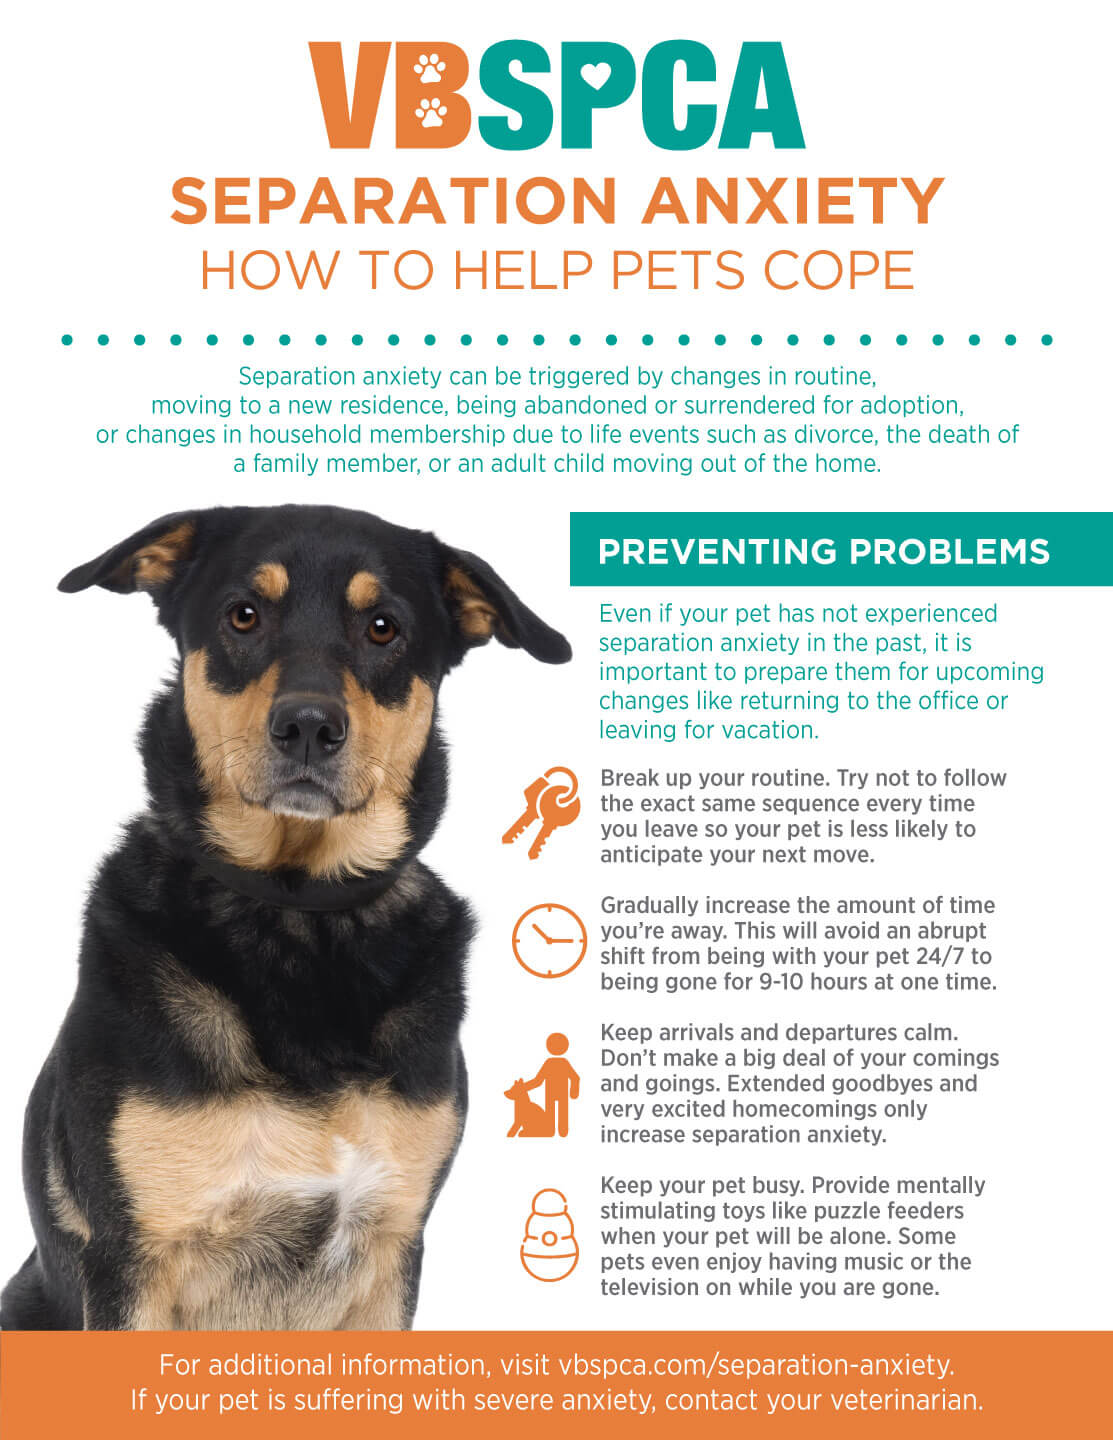 https://vbspca.com/wp-content/uploads/2021/03/Educational_Separation_Anxiety_2021.jpg